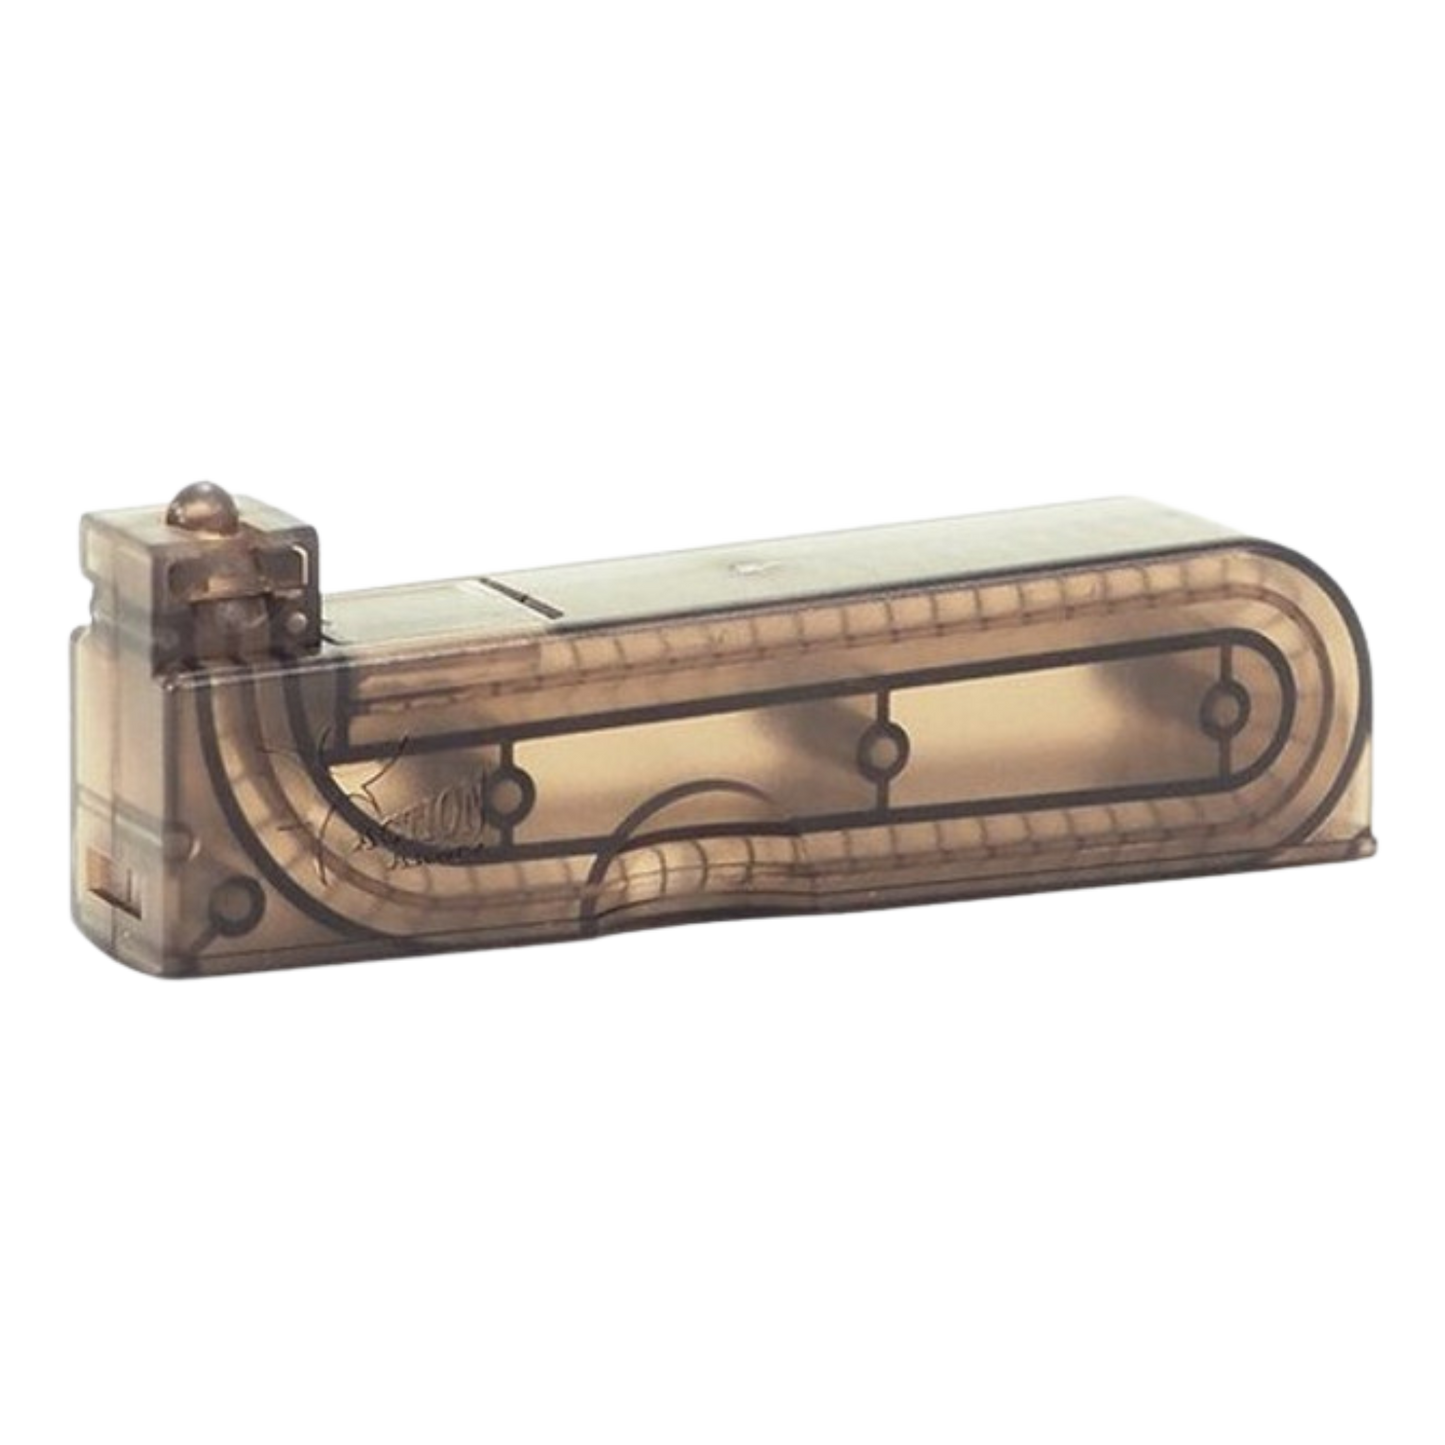 Action Army T11 Sniper Rifle Magazine